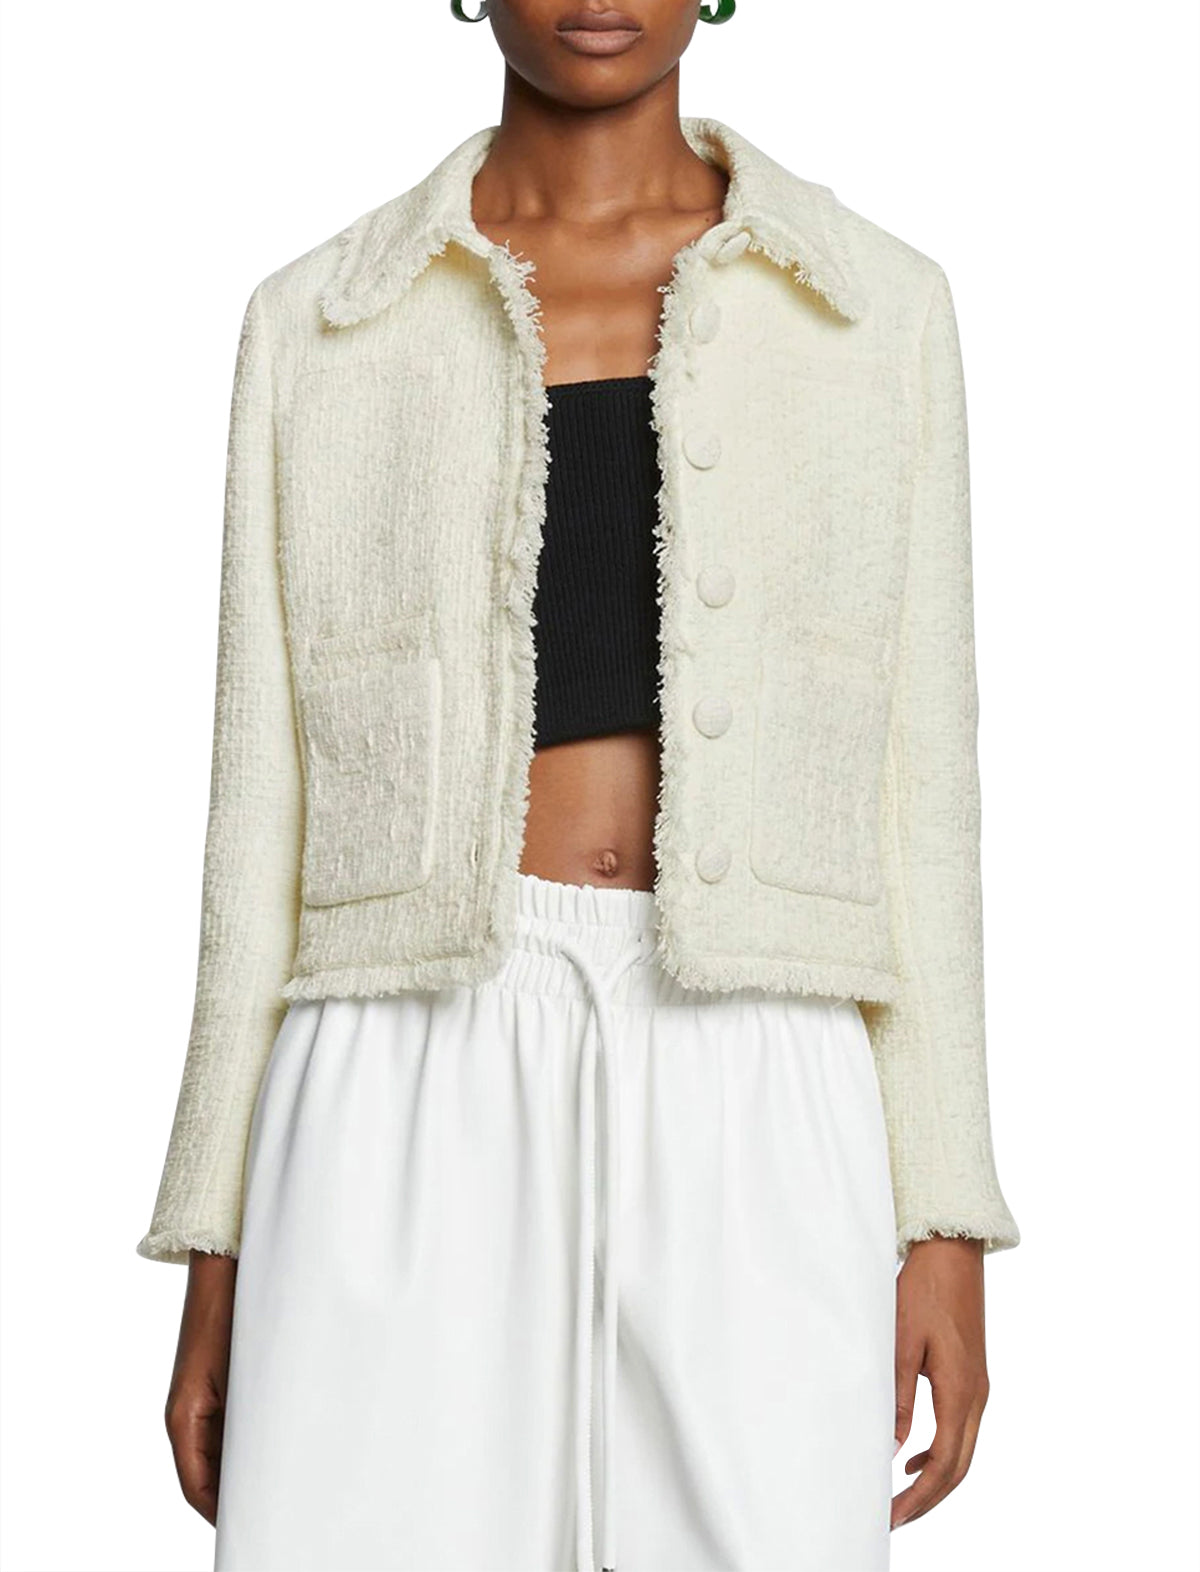 PROENZA SCHOULER WHITE LABEL Tweed Cropped Jacket in Off White